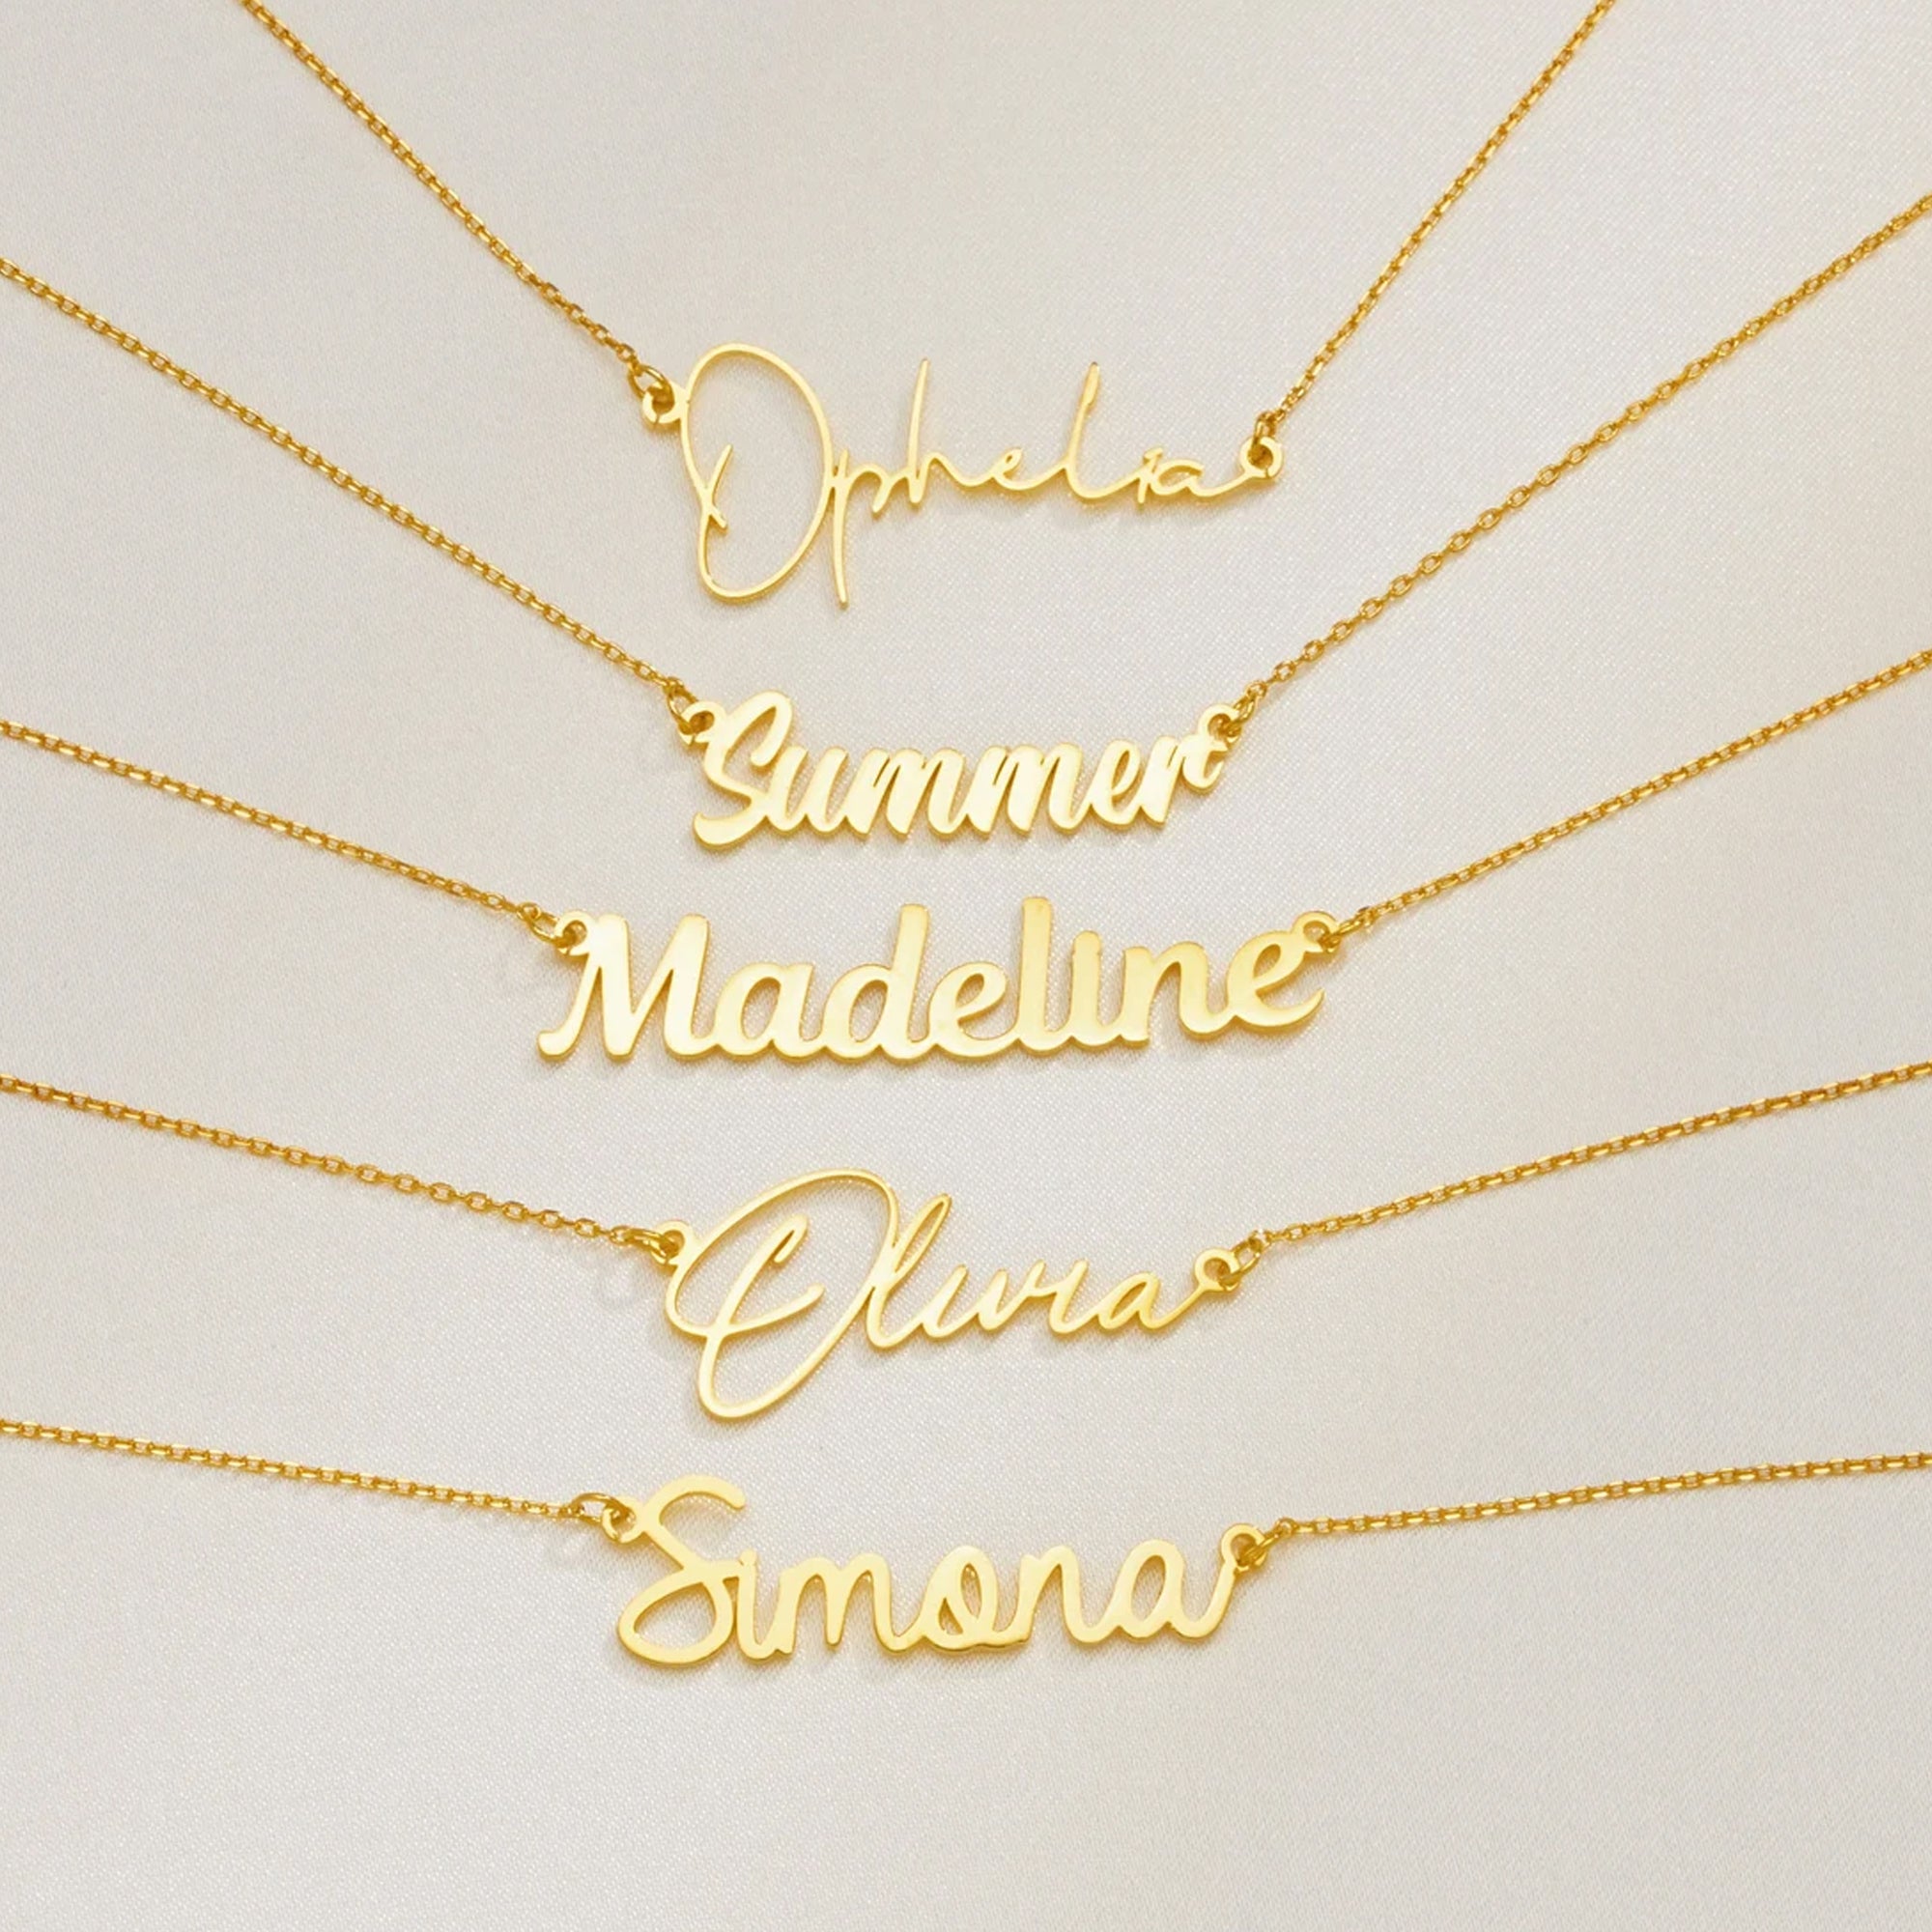 Auntie - Gift for Aunt - Personalized Name Necklace